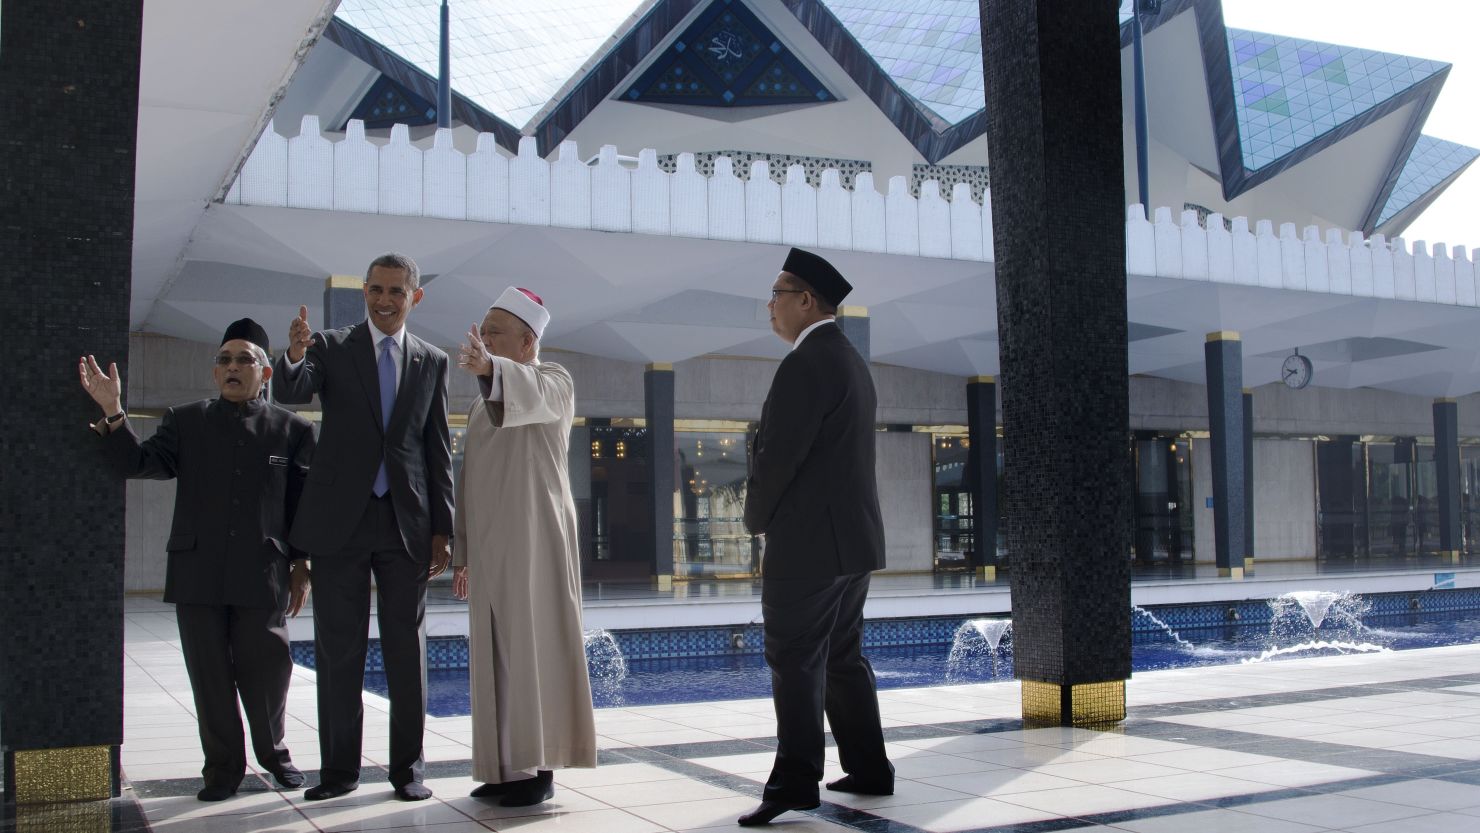 In Malaysia, President Barack Obama (second from left) receives a tour of the National Mosque in Kuala Lumpur on April 27, 2014. Obama paid homage to Malaysia's moderate brand of Islam and visited the mosque during an Asian trip.    